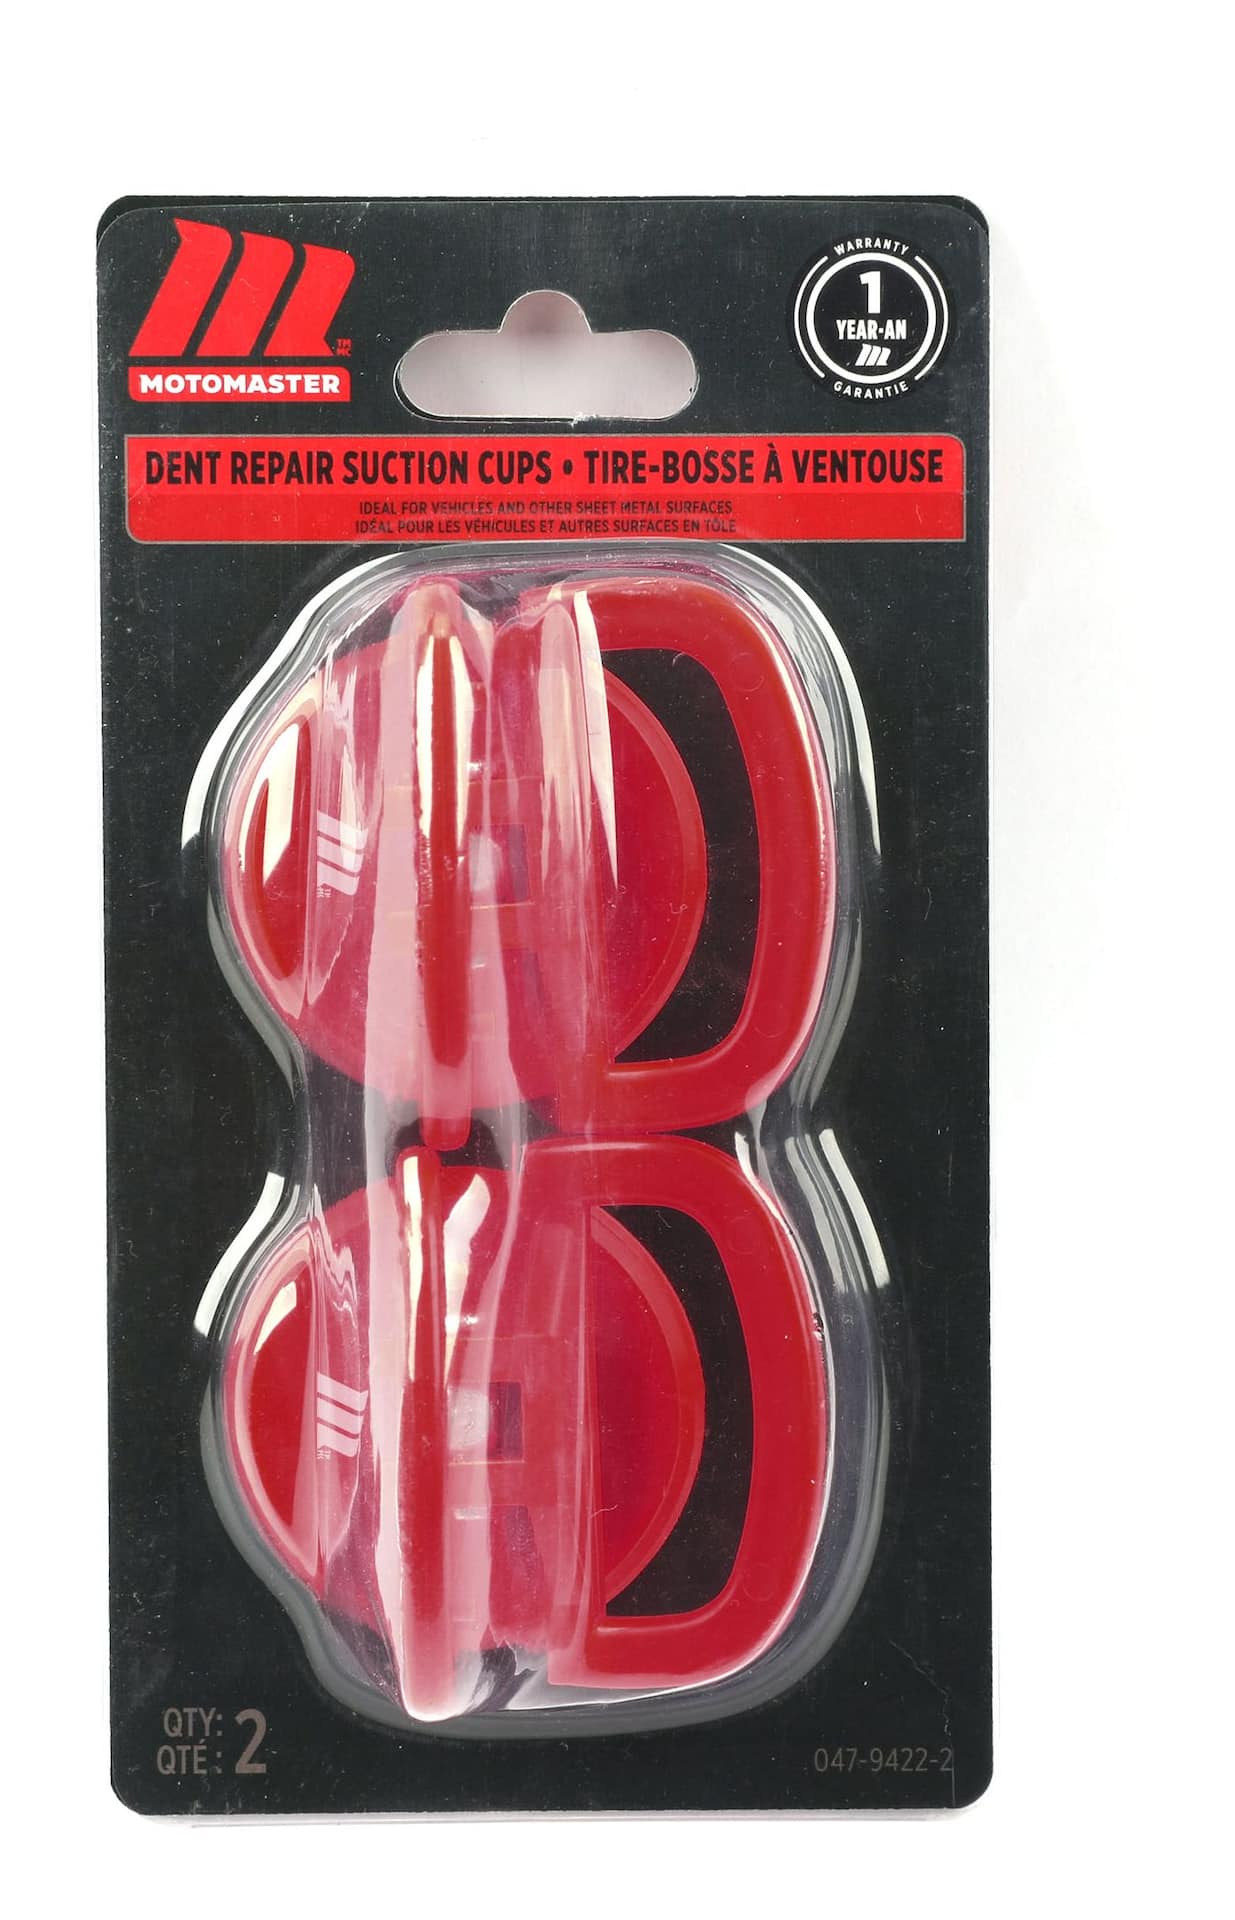 H.E. 2-Piece Plastic Suction Hook - Ideal for Home & Office Use